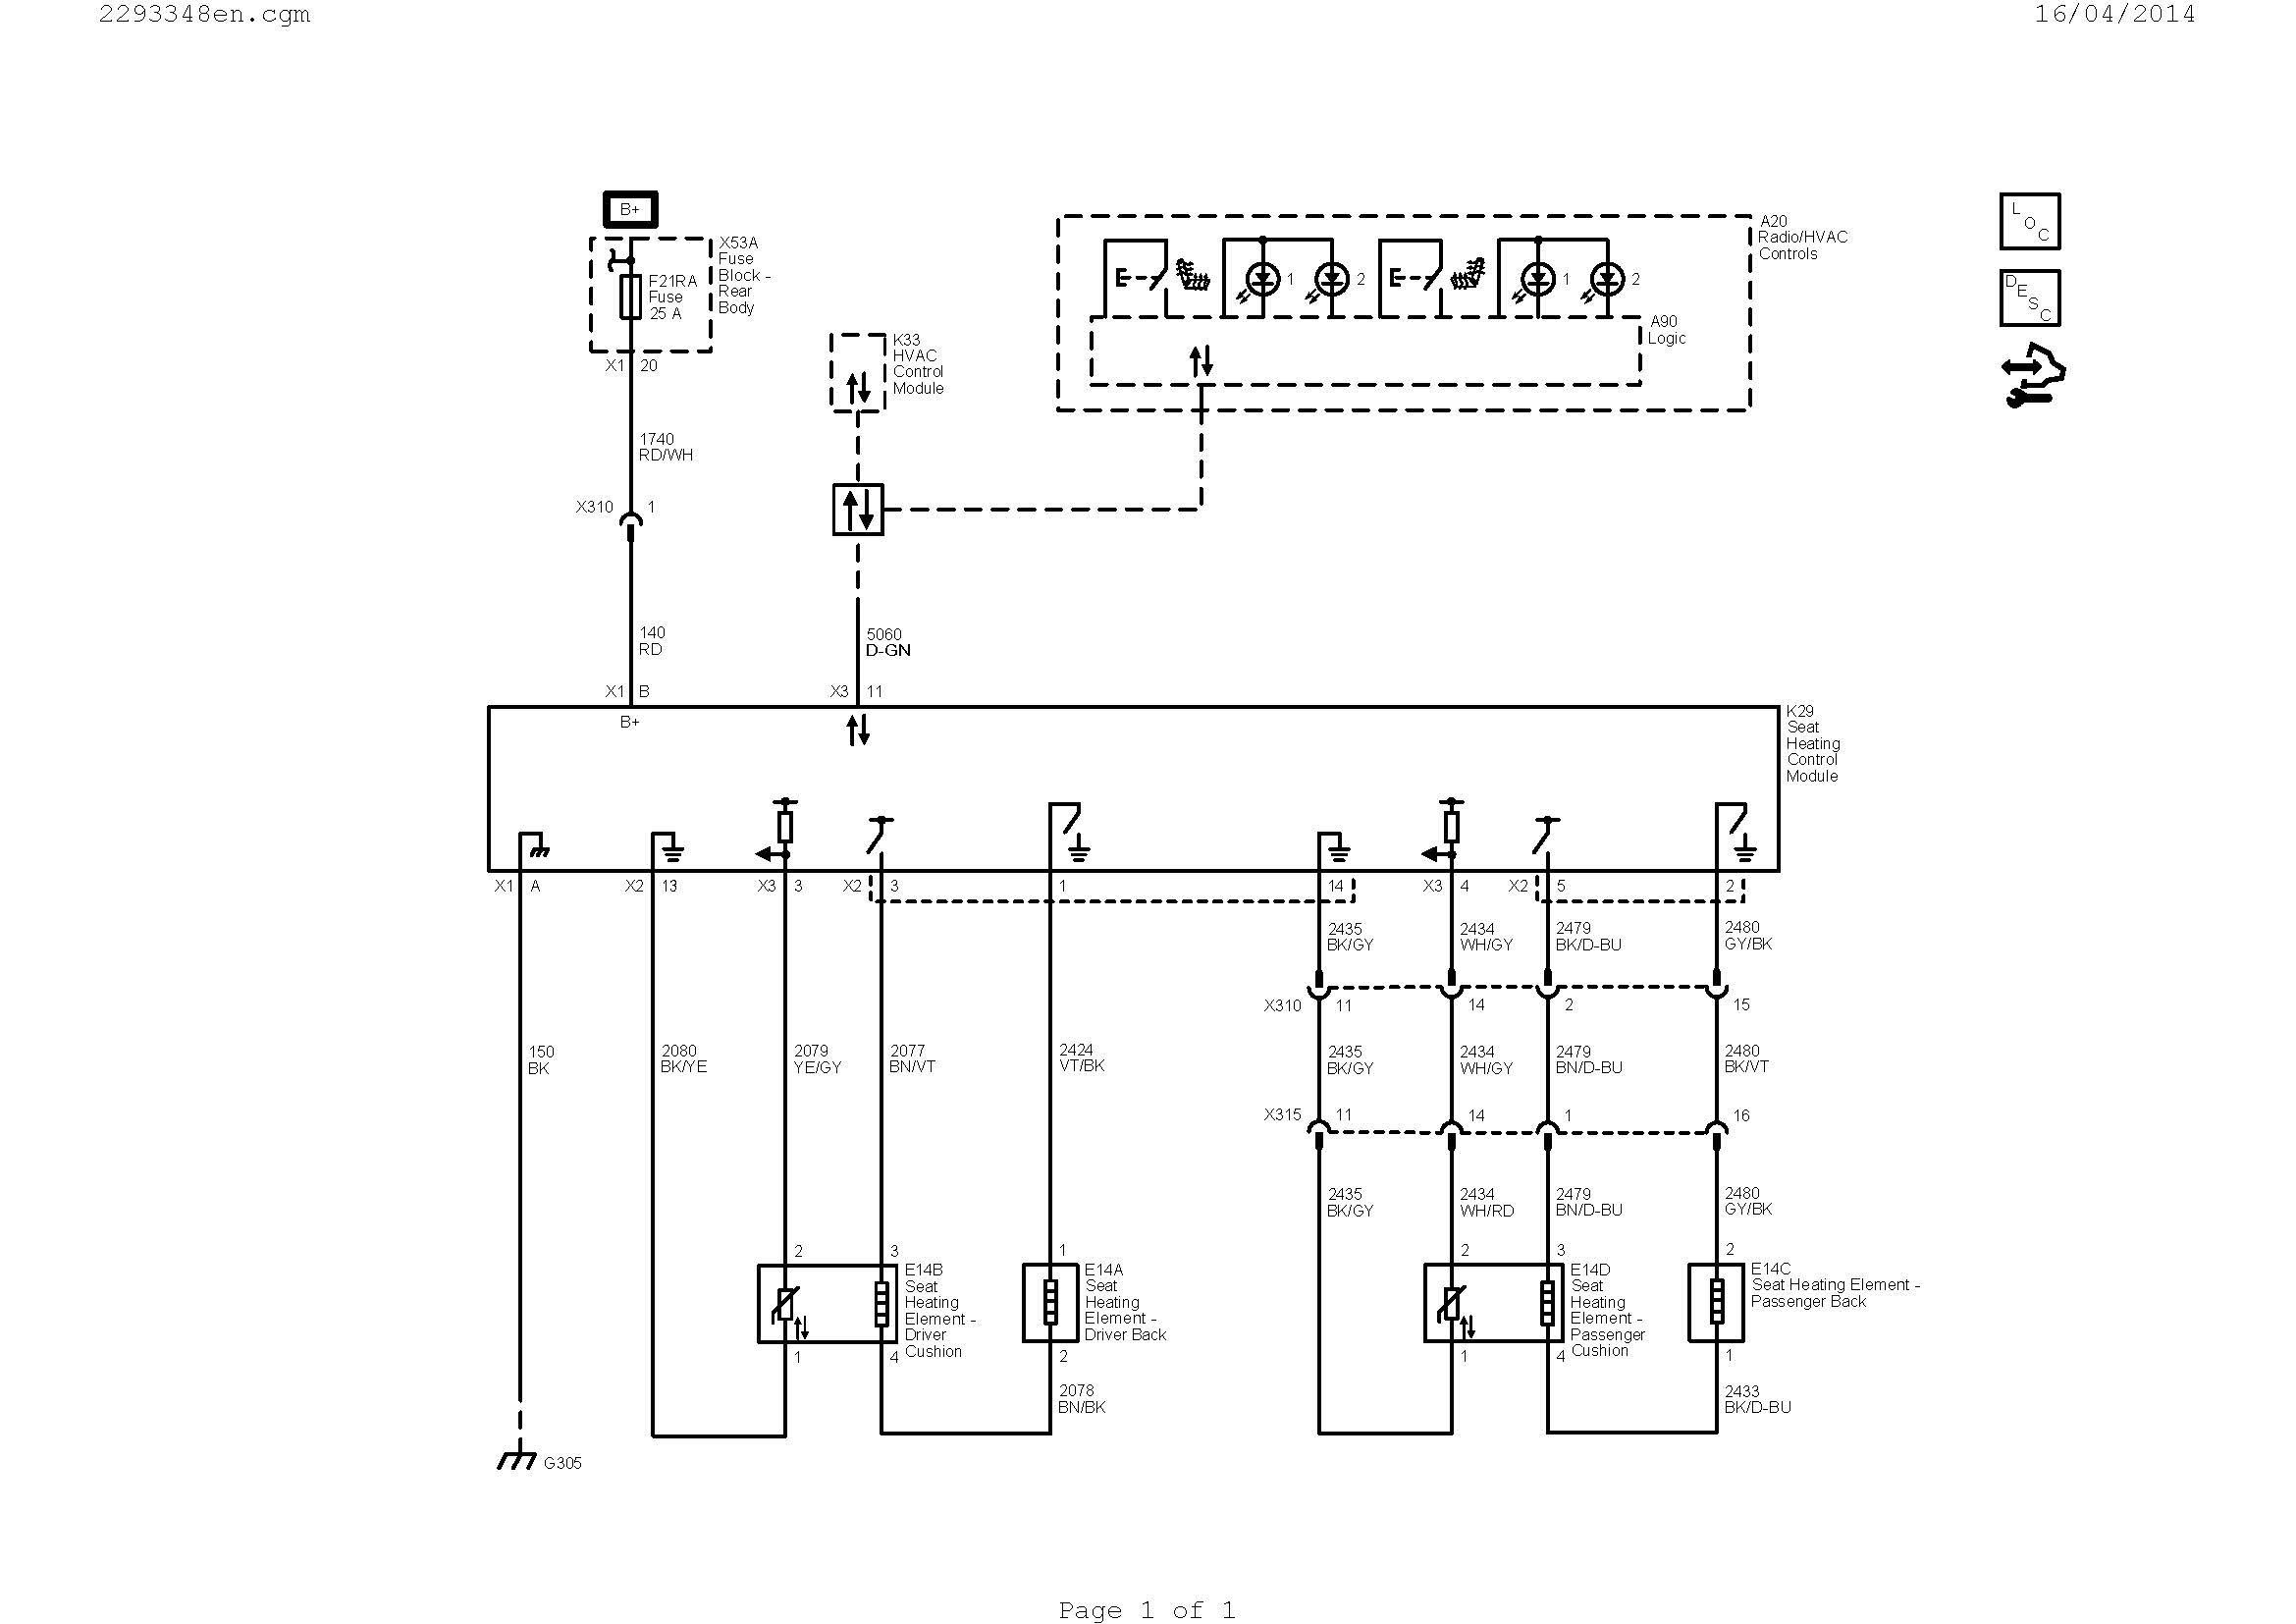 on on on switch wiring diagram Collection Wiring Diagram For A Relay Switch Save Wiring DOWNLOAD Wiring Diagram